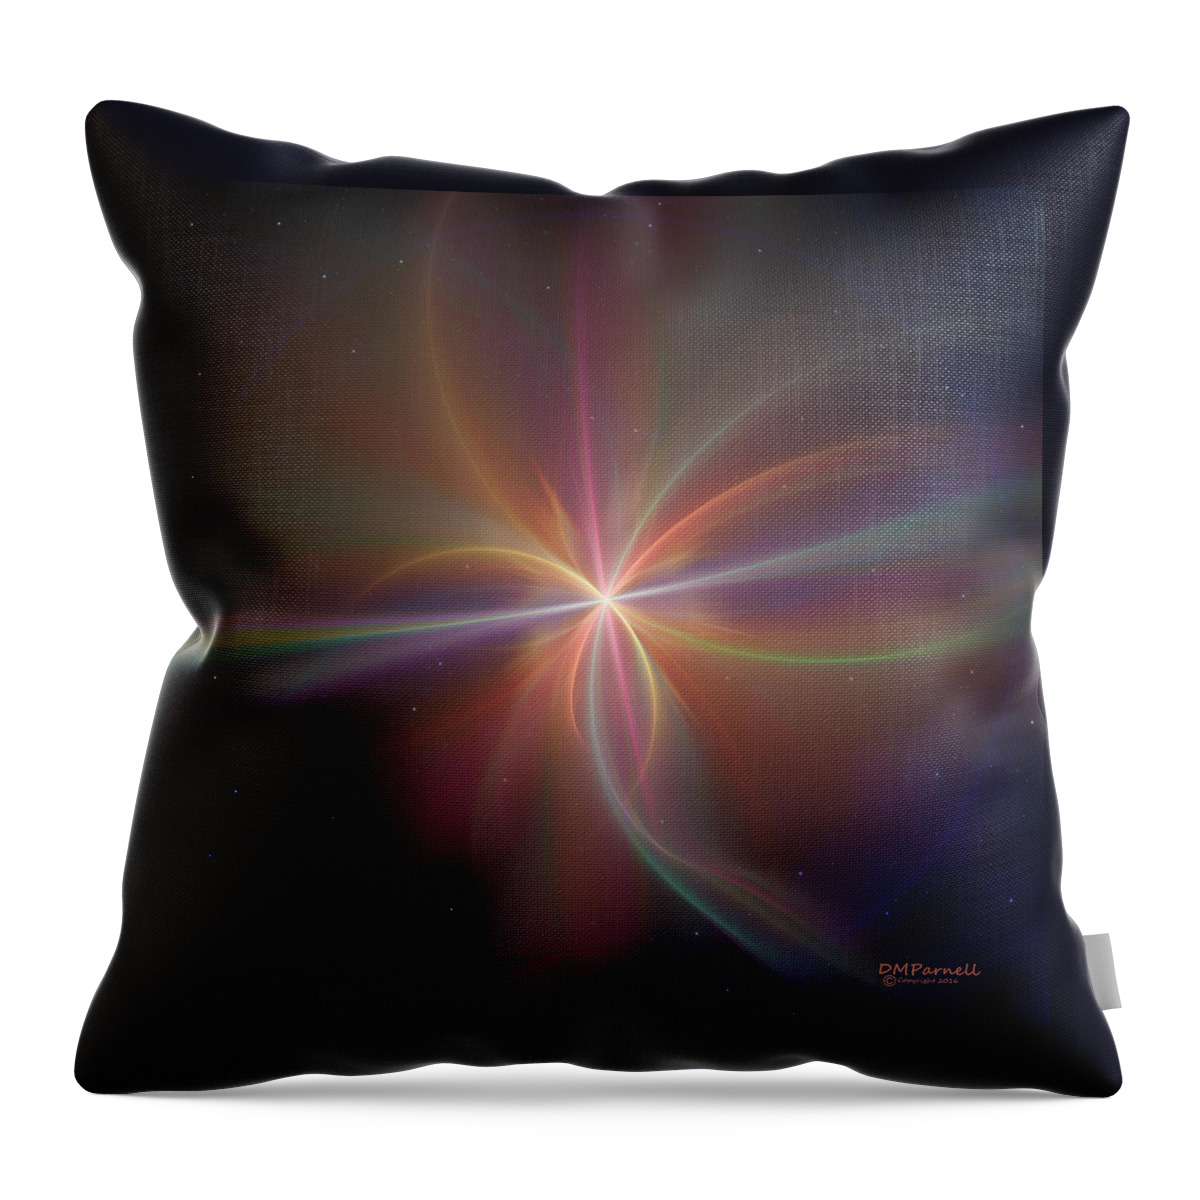 Star Throw Pillow featuring the digital art Cosmic Event by Diane Parnell